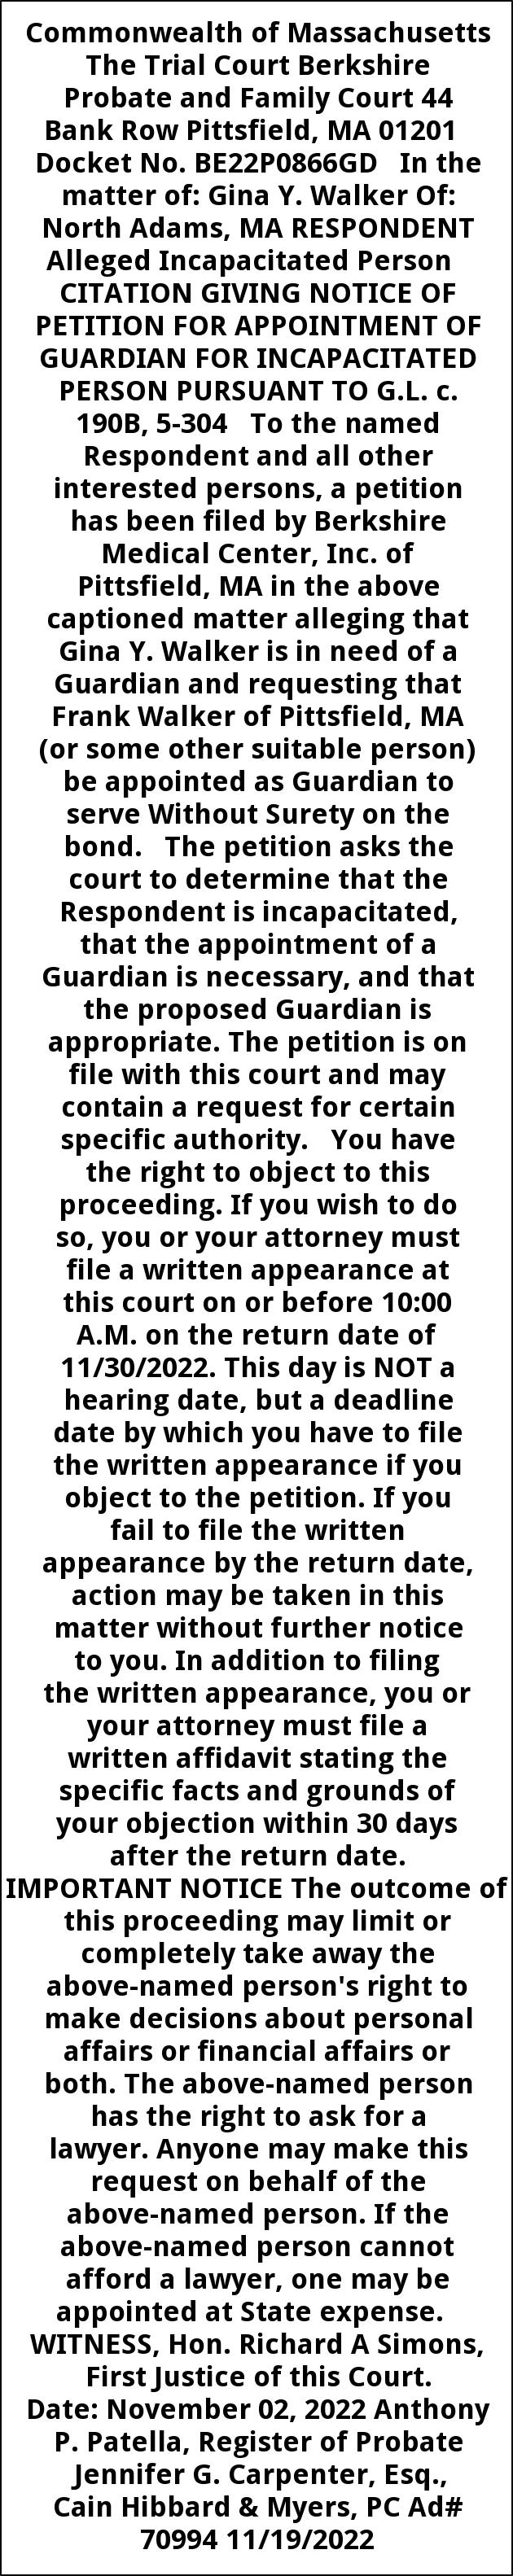 Notice of Petition